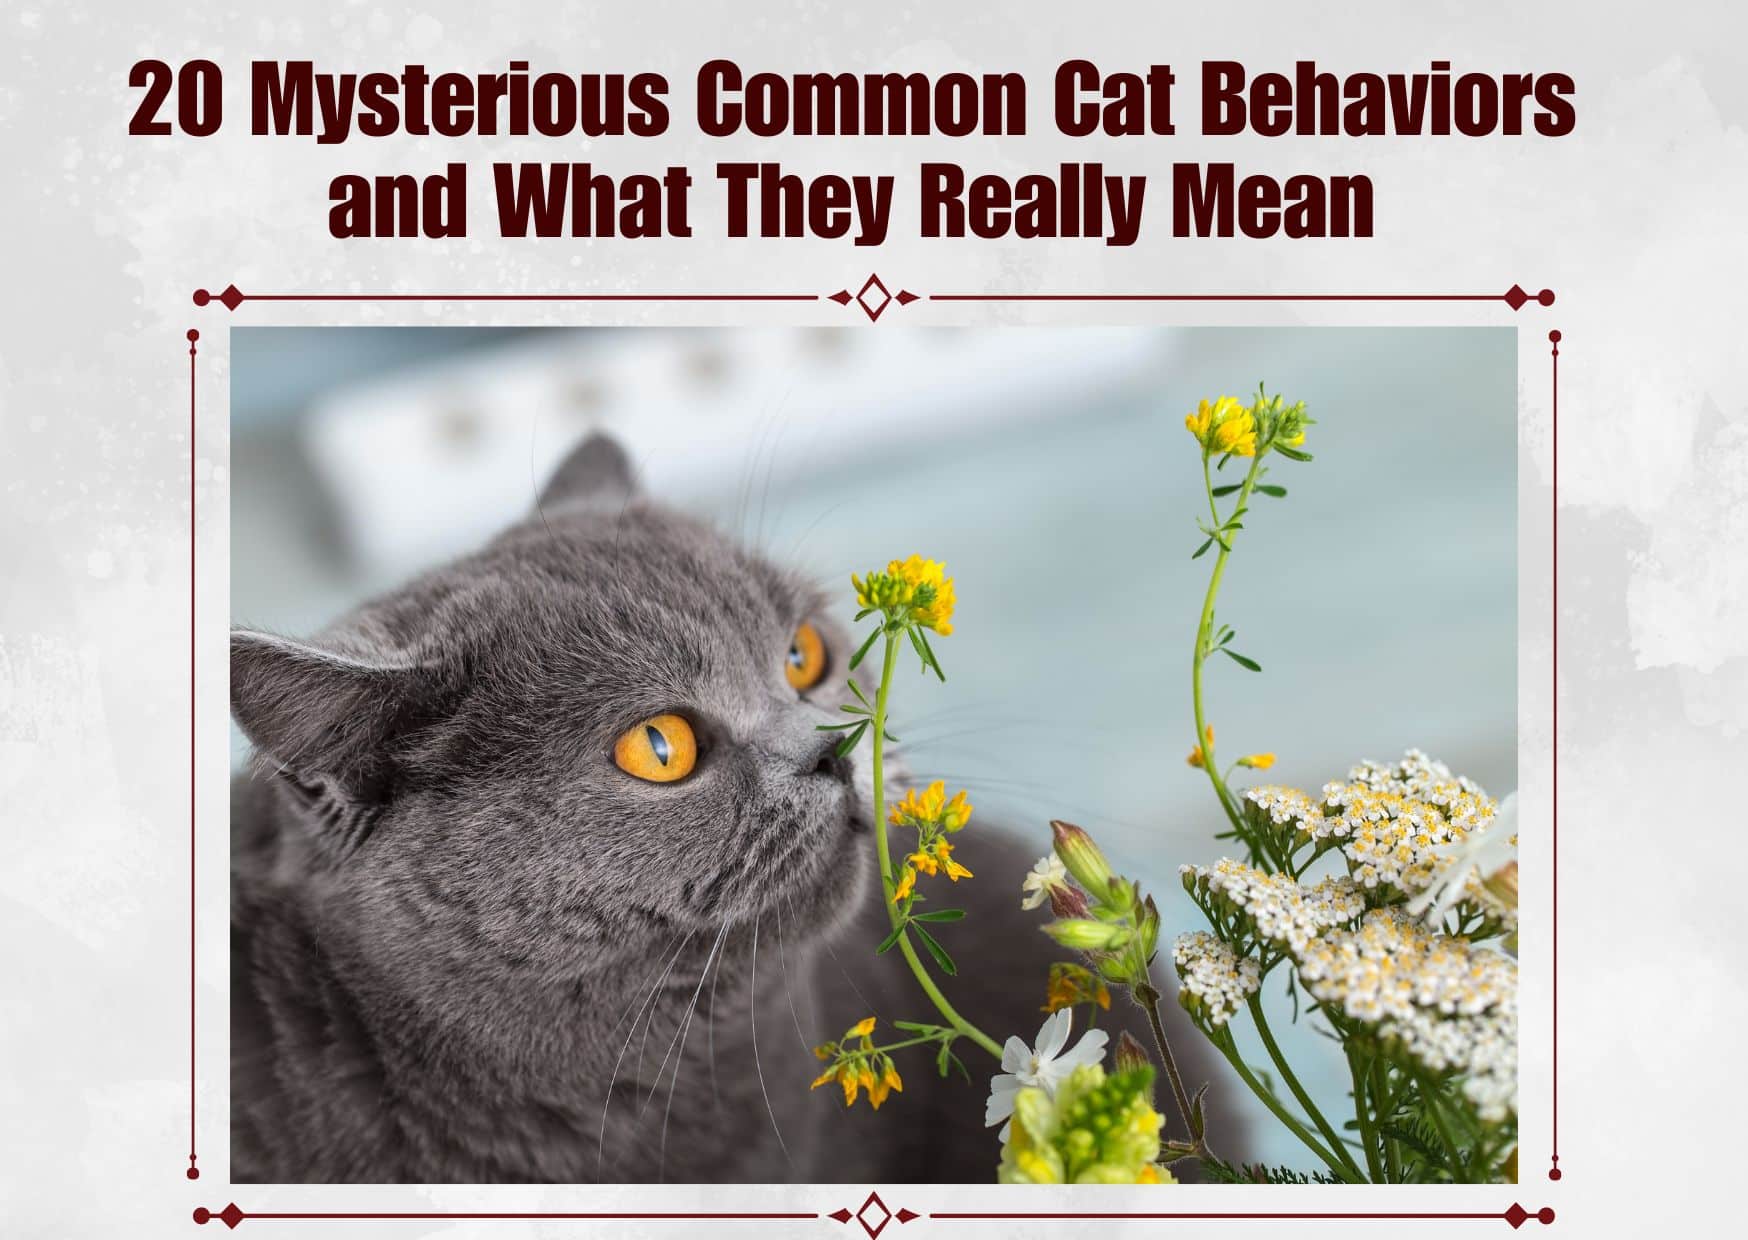 20 Mysterious Common Cat Behaviors and What They Really Mean